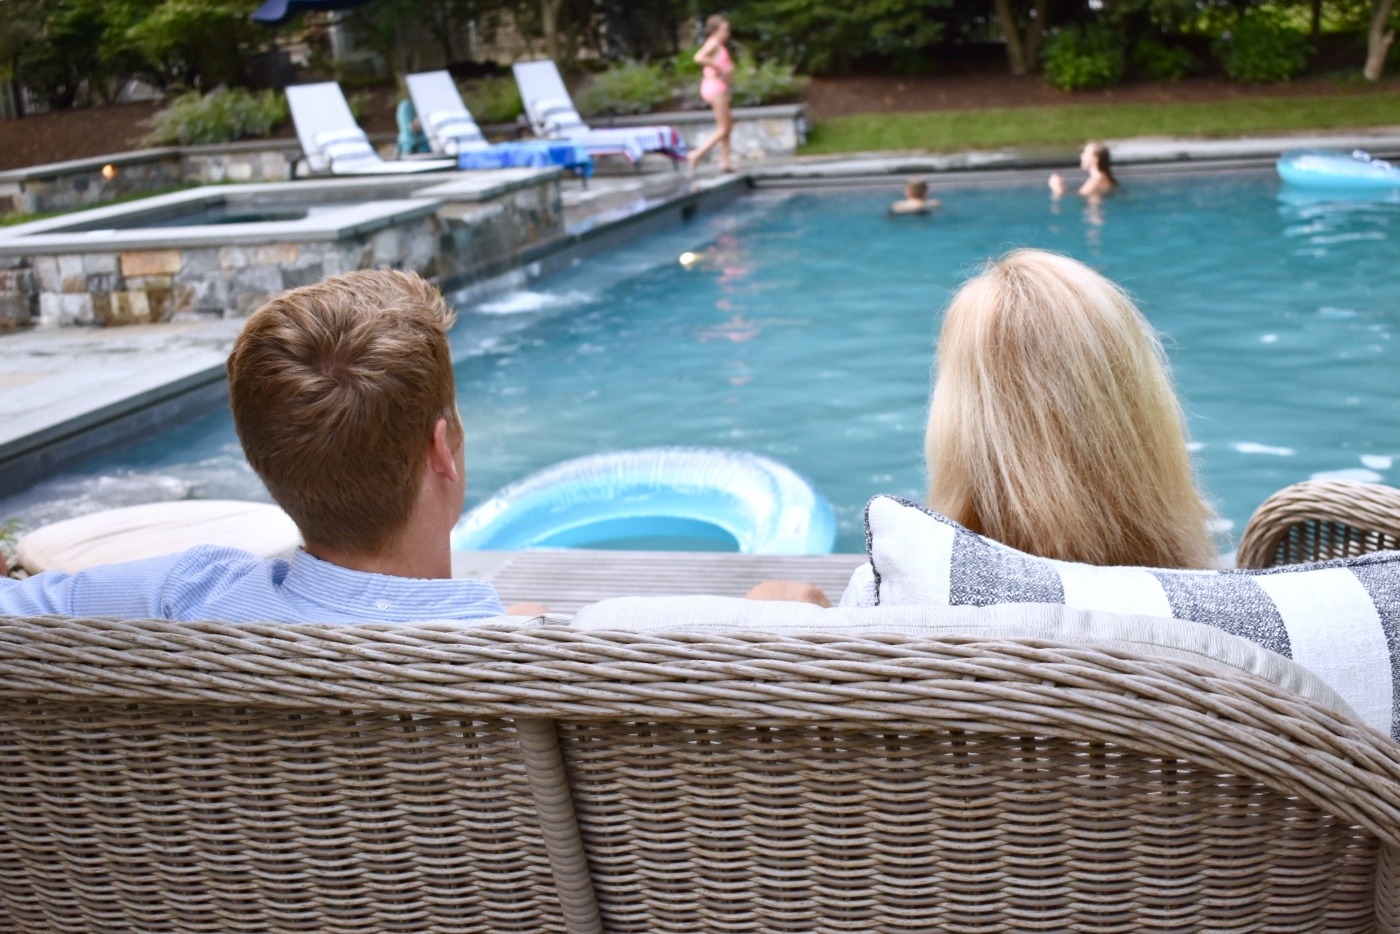 Two people are sitting on a wicker sofa by a pool, watching others swim on a sunny day with greenery in the background.